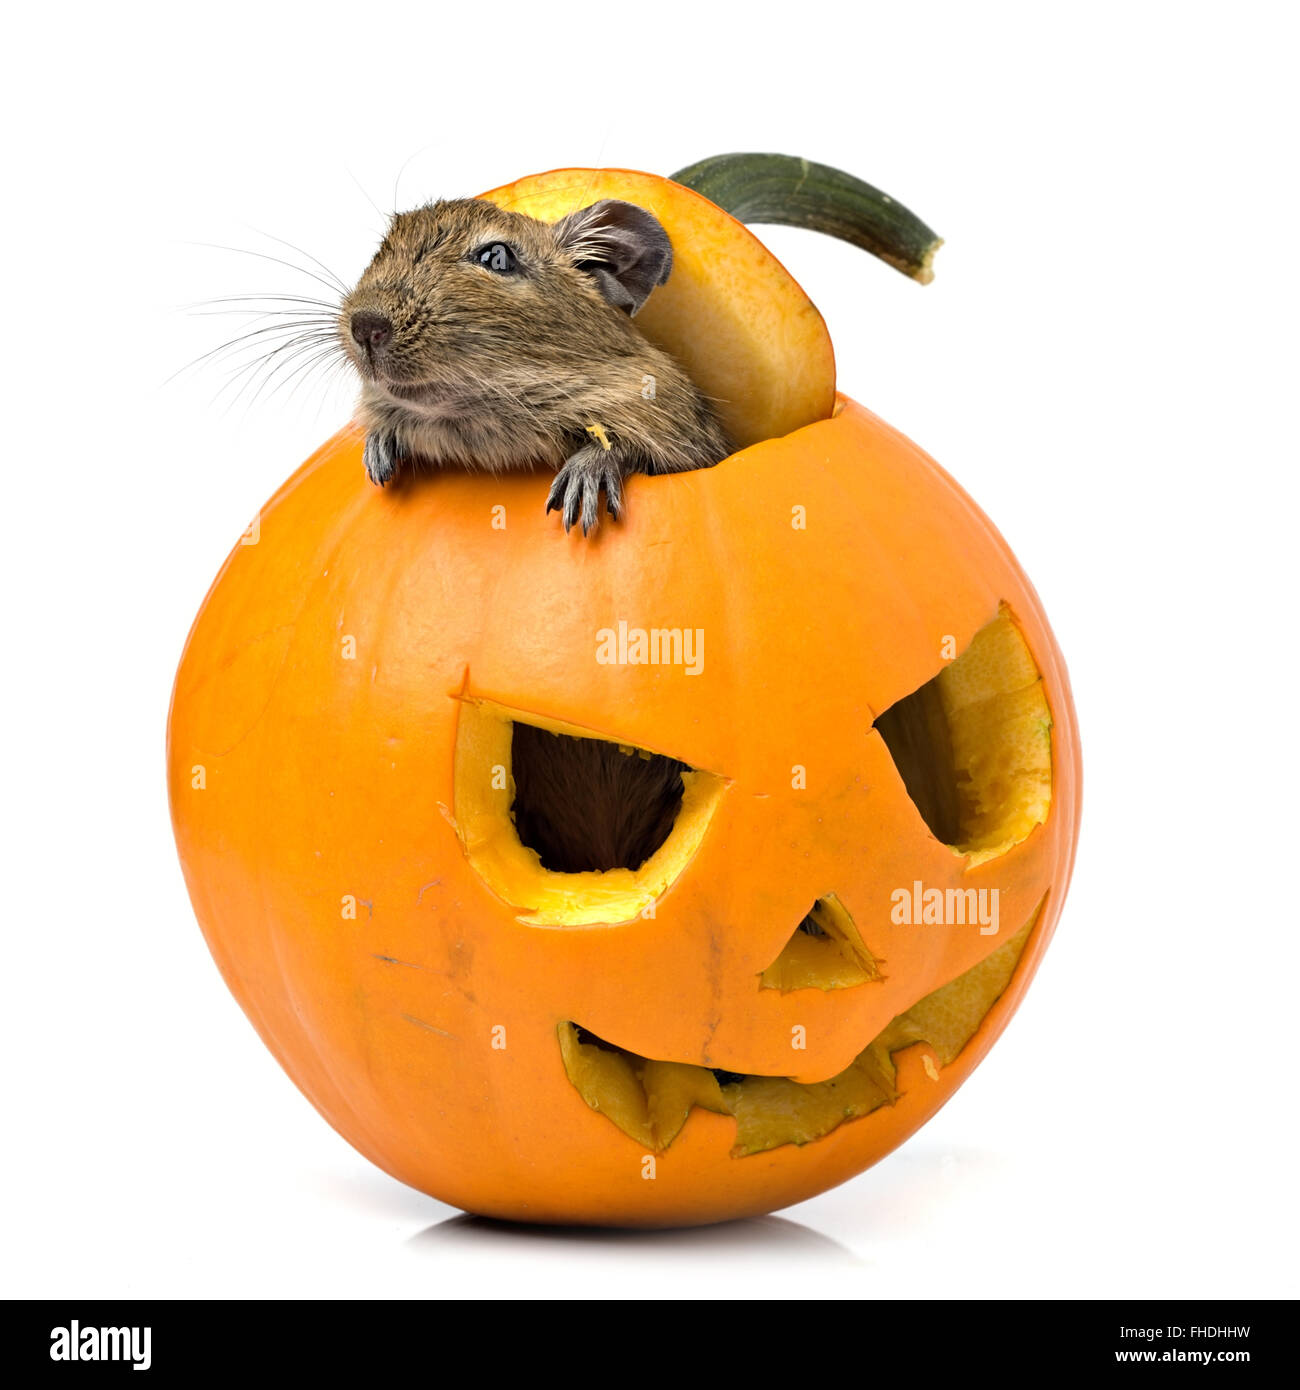 Halloween pumpkin with mouse inside Stock Photo